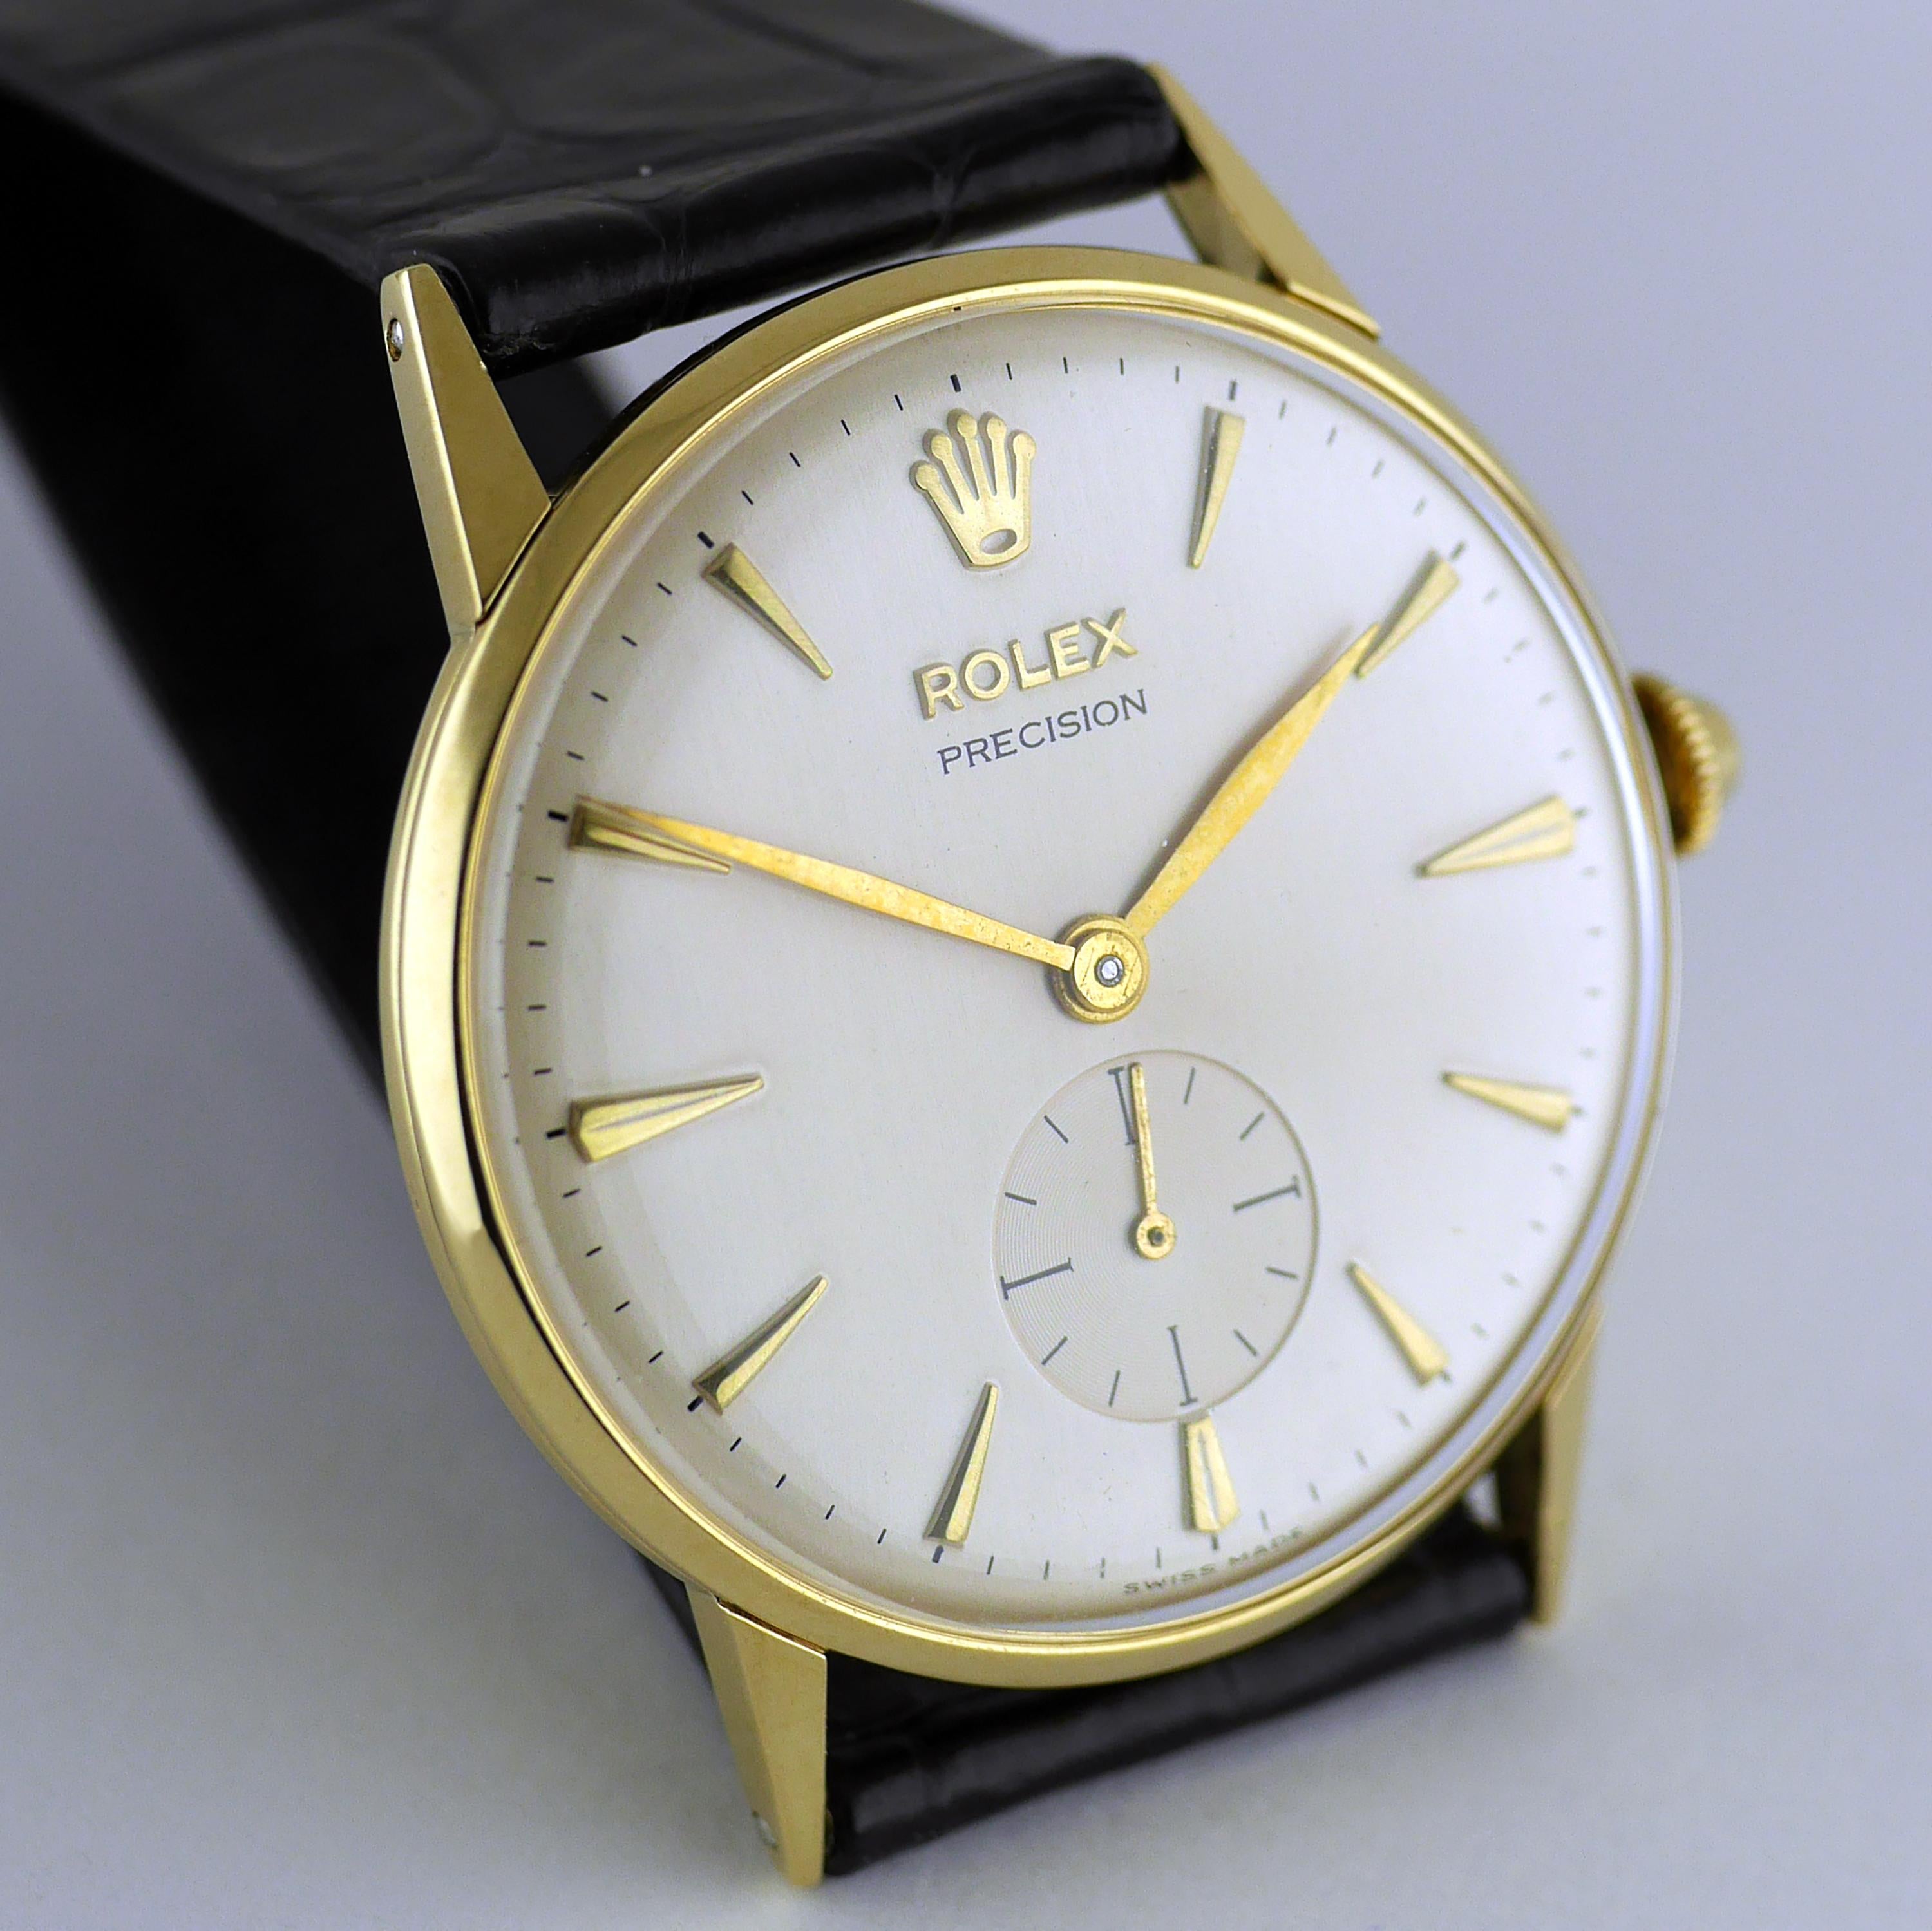 Vintage Rolex Precision wristwatch, circa 1959.

Snap back 18 carat gold case with tapered fancy lugs.

Rolex, 17-Rubies (Jewels) precision lever escapement movement with Superbalance. Subsidiary seconds.

Silvered dial with raised gold tapered,